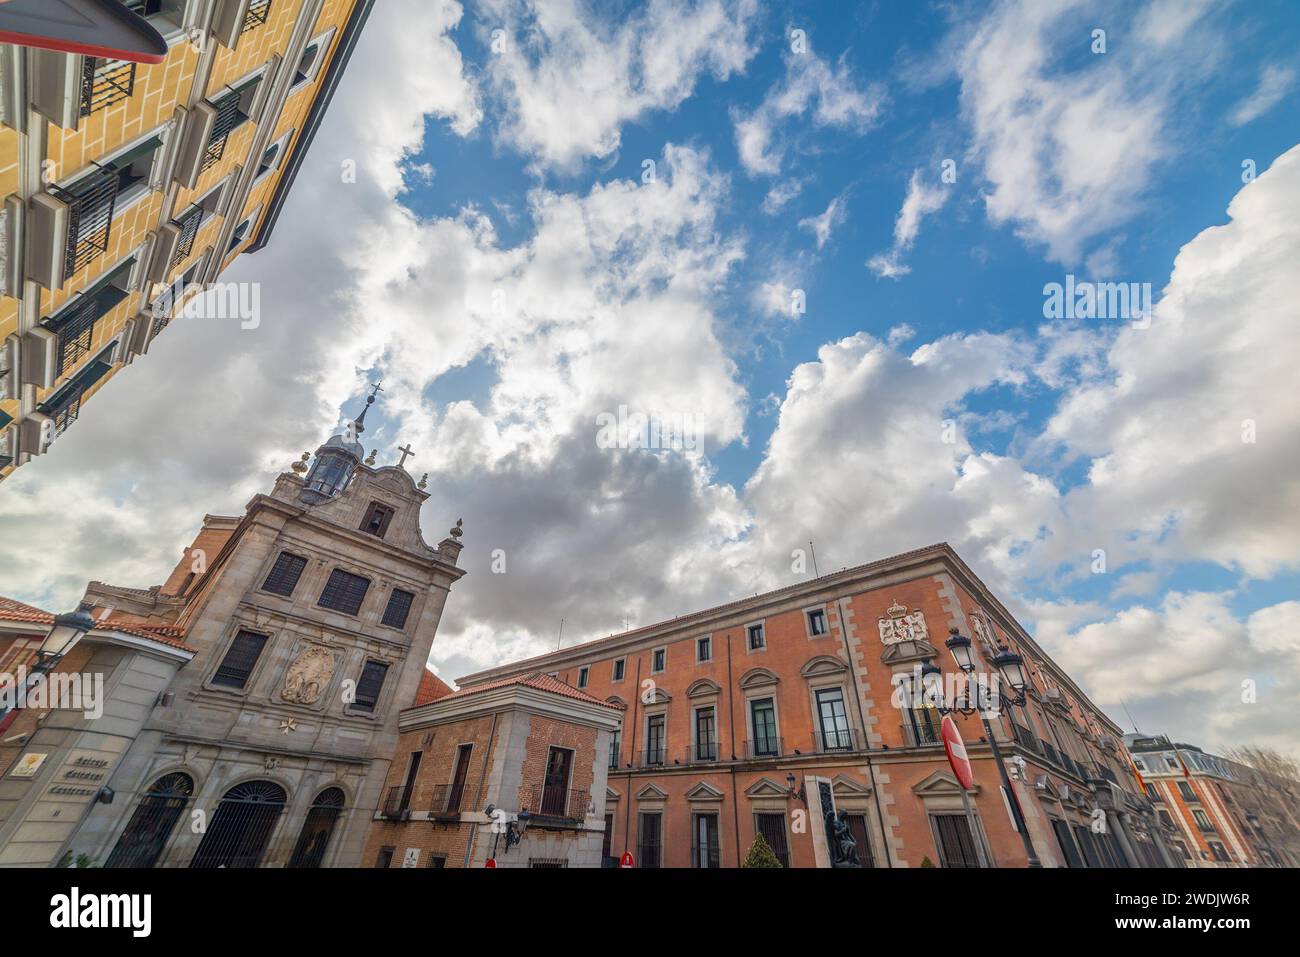 Fuerzas Armadas cathedral in Madrid under a cloudy sky, Spain Stock Photo